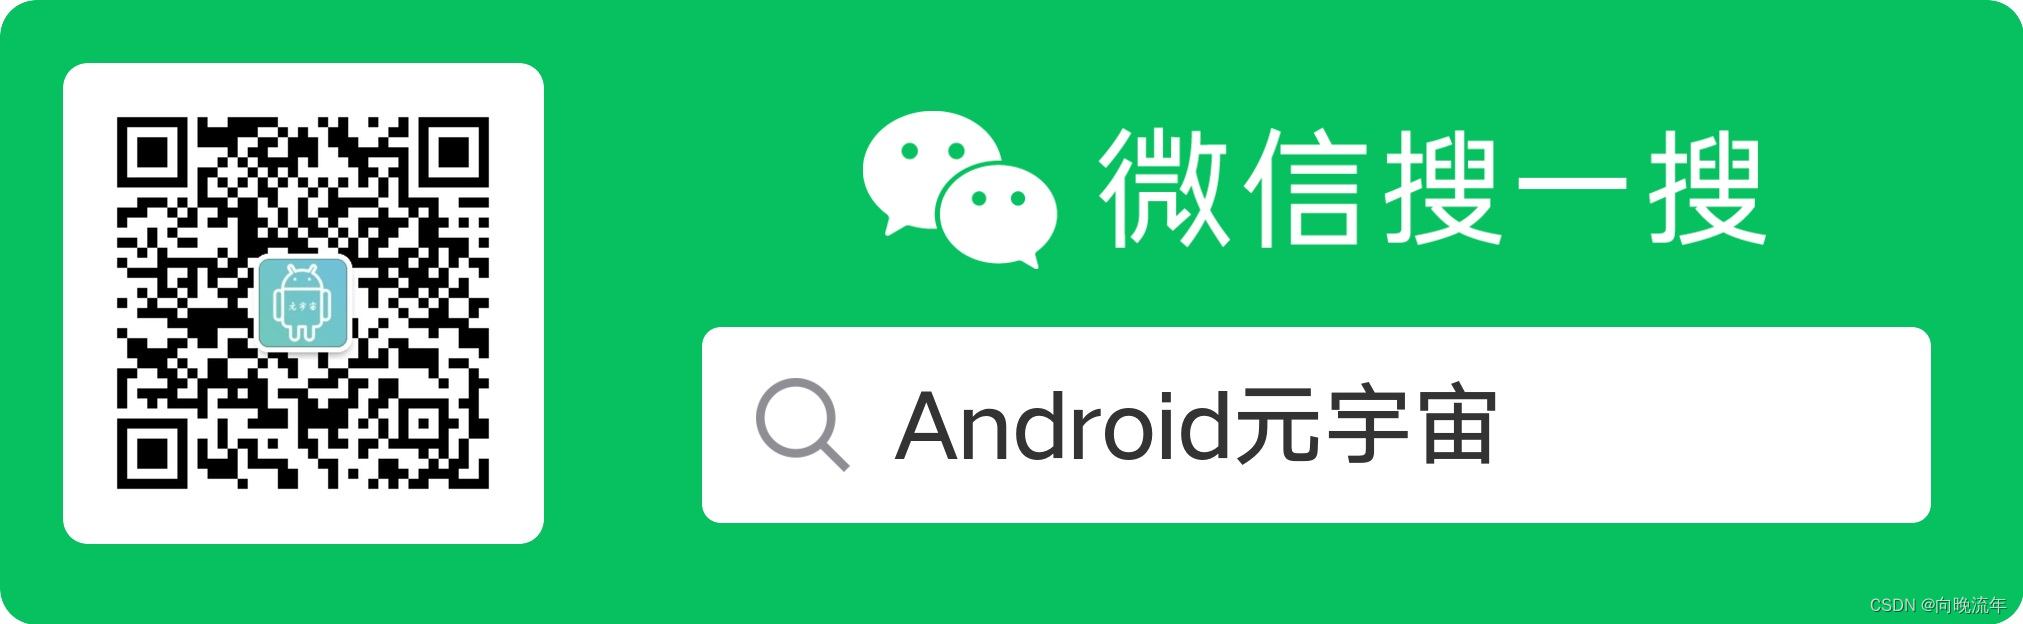 Android Graphics 显示系统 - 解读Source Crop和Display Frame(三二)